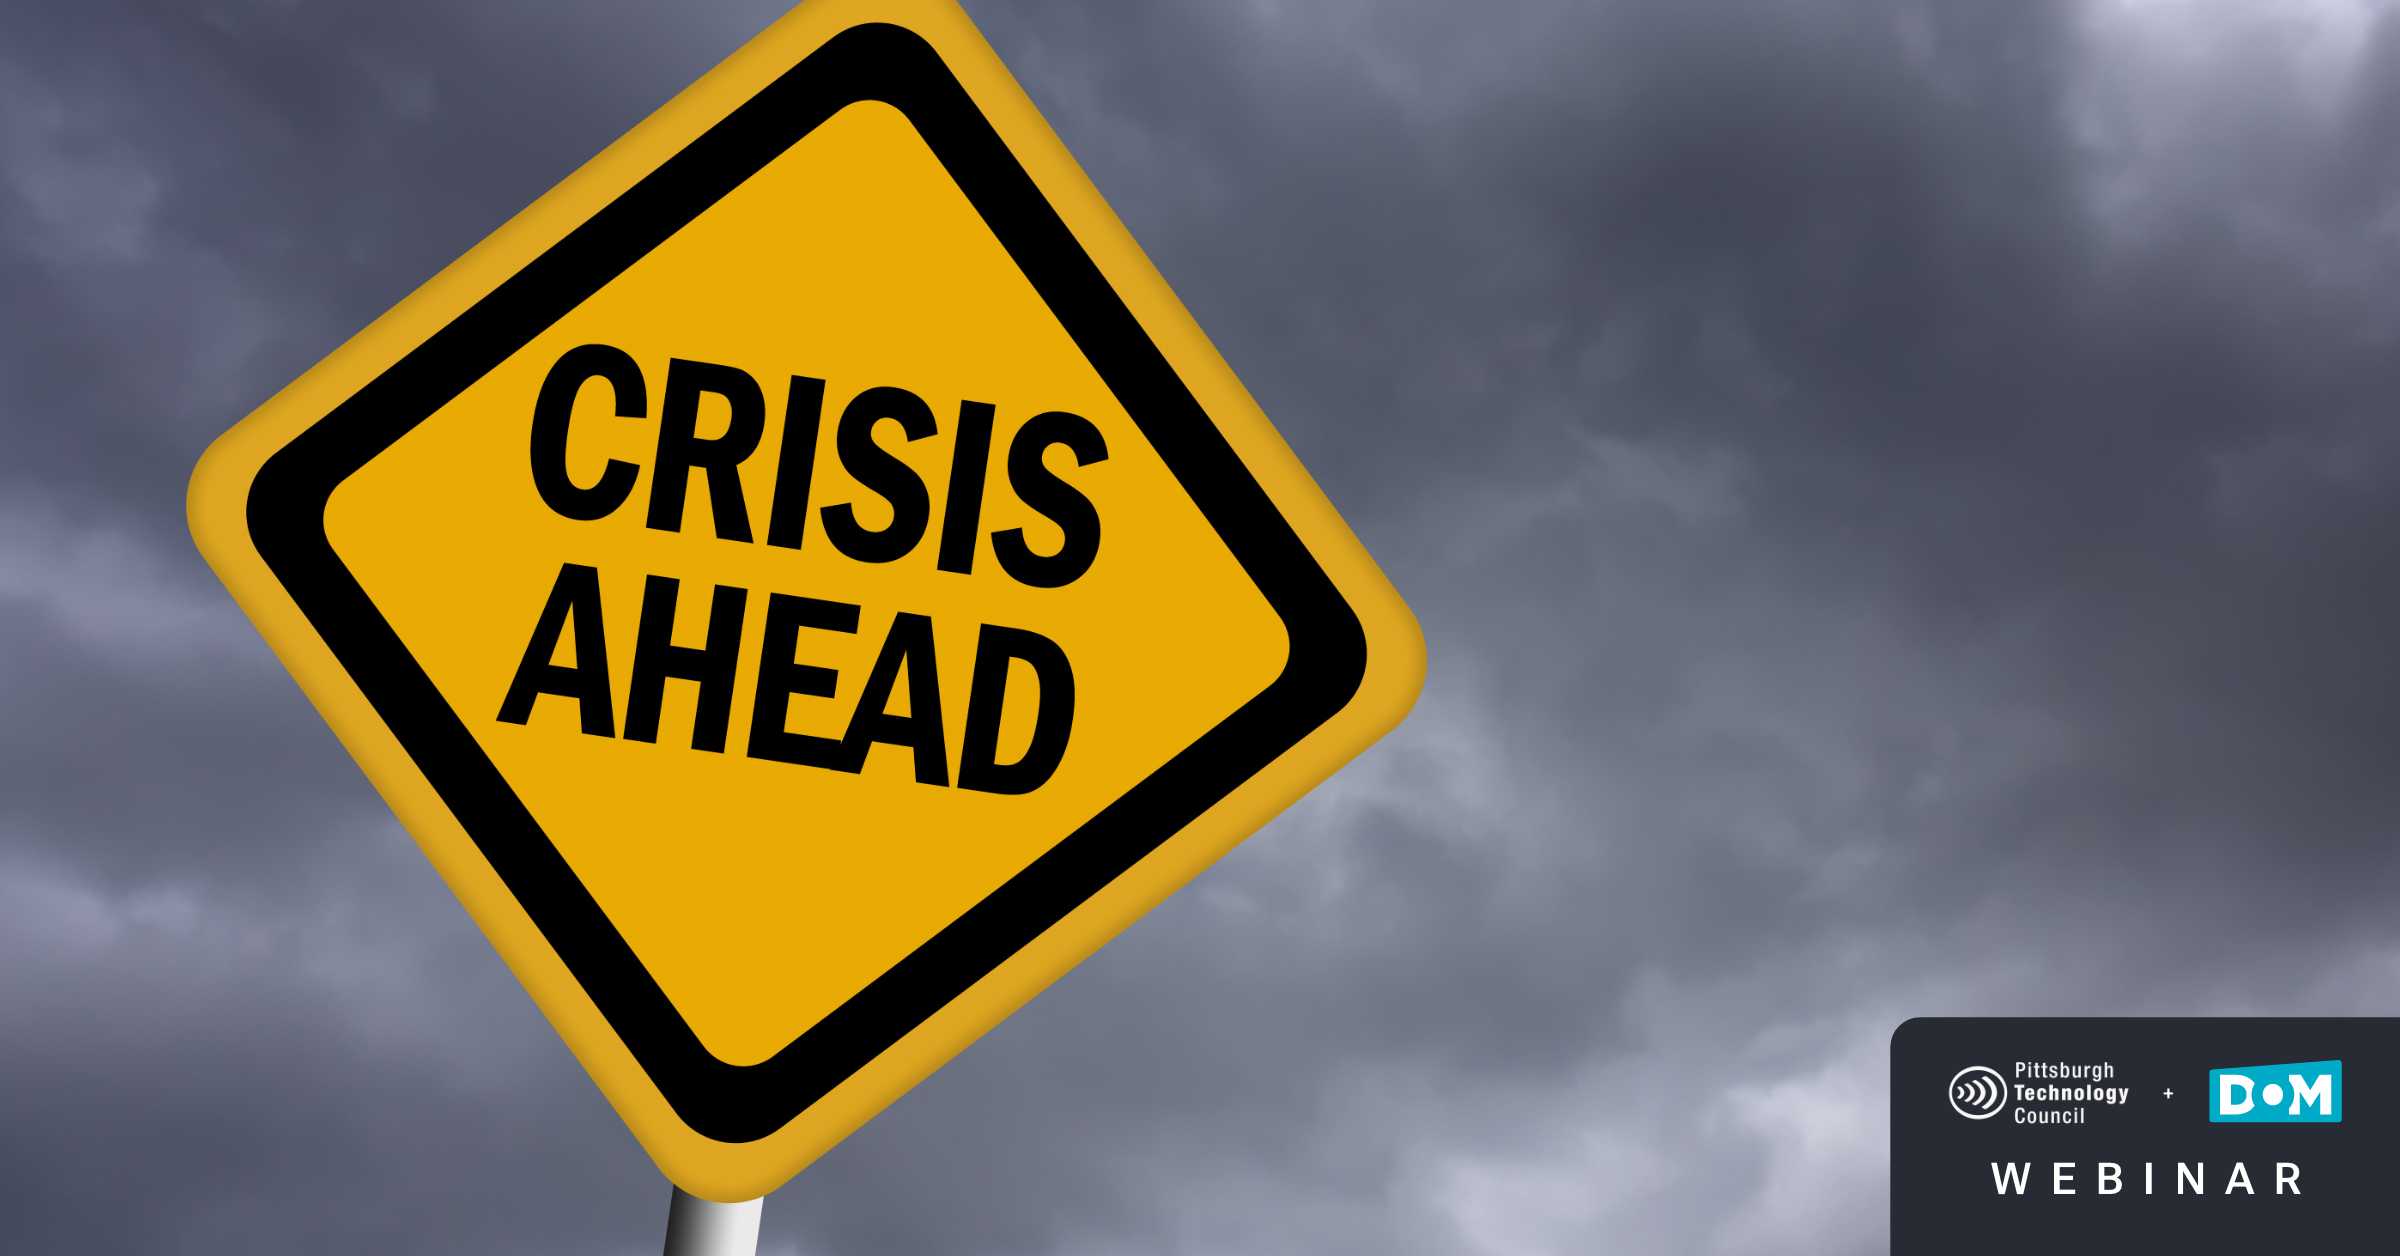 Crisis Digital Marketing | Updating Marketing Strategy in Uncertain Times